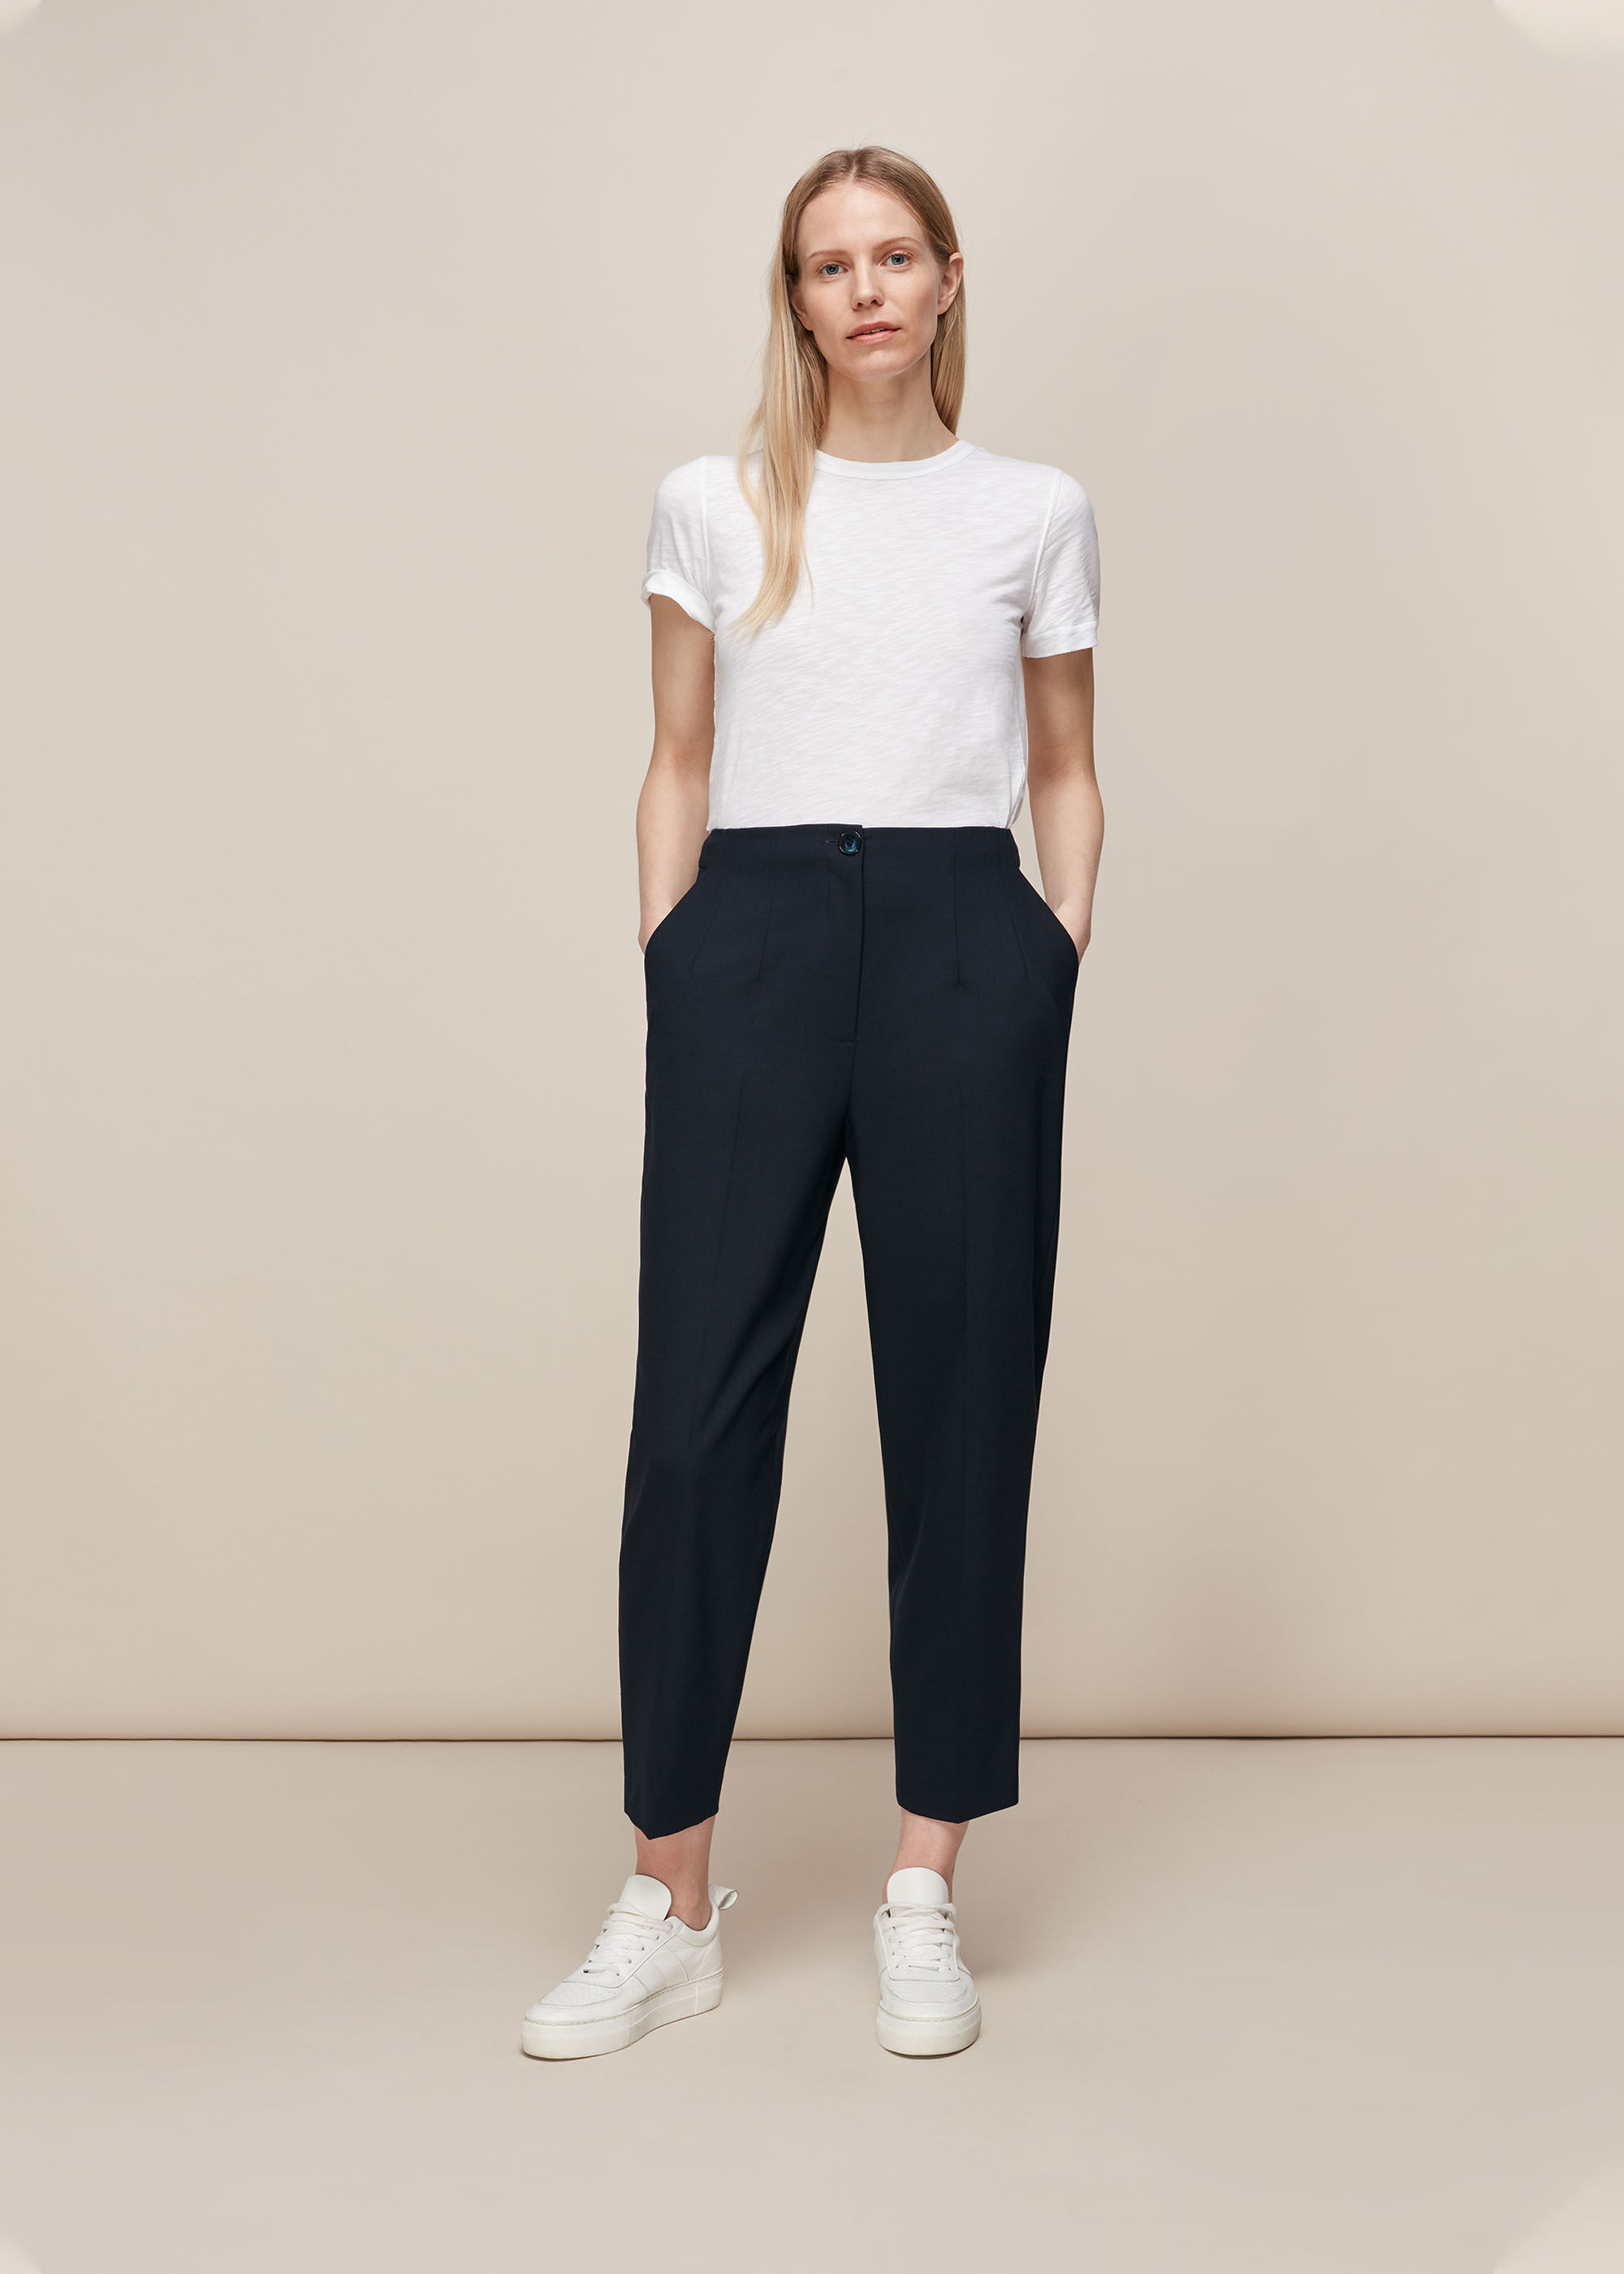 Slimfit Trouser pants high waisted  Shopee Philippines